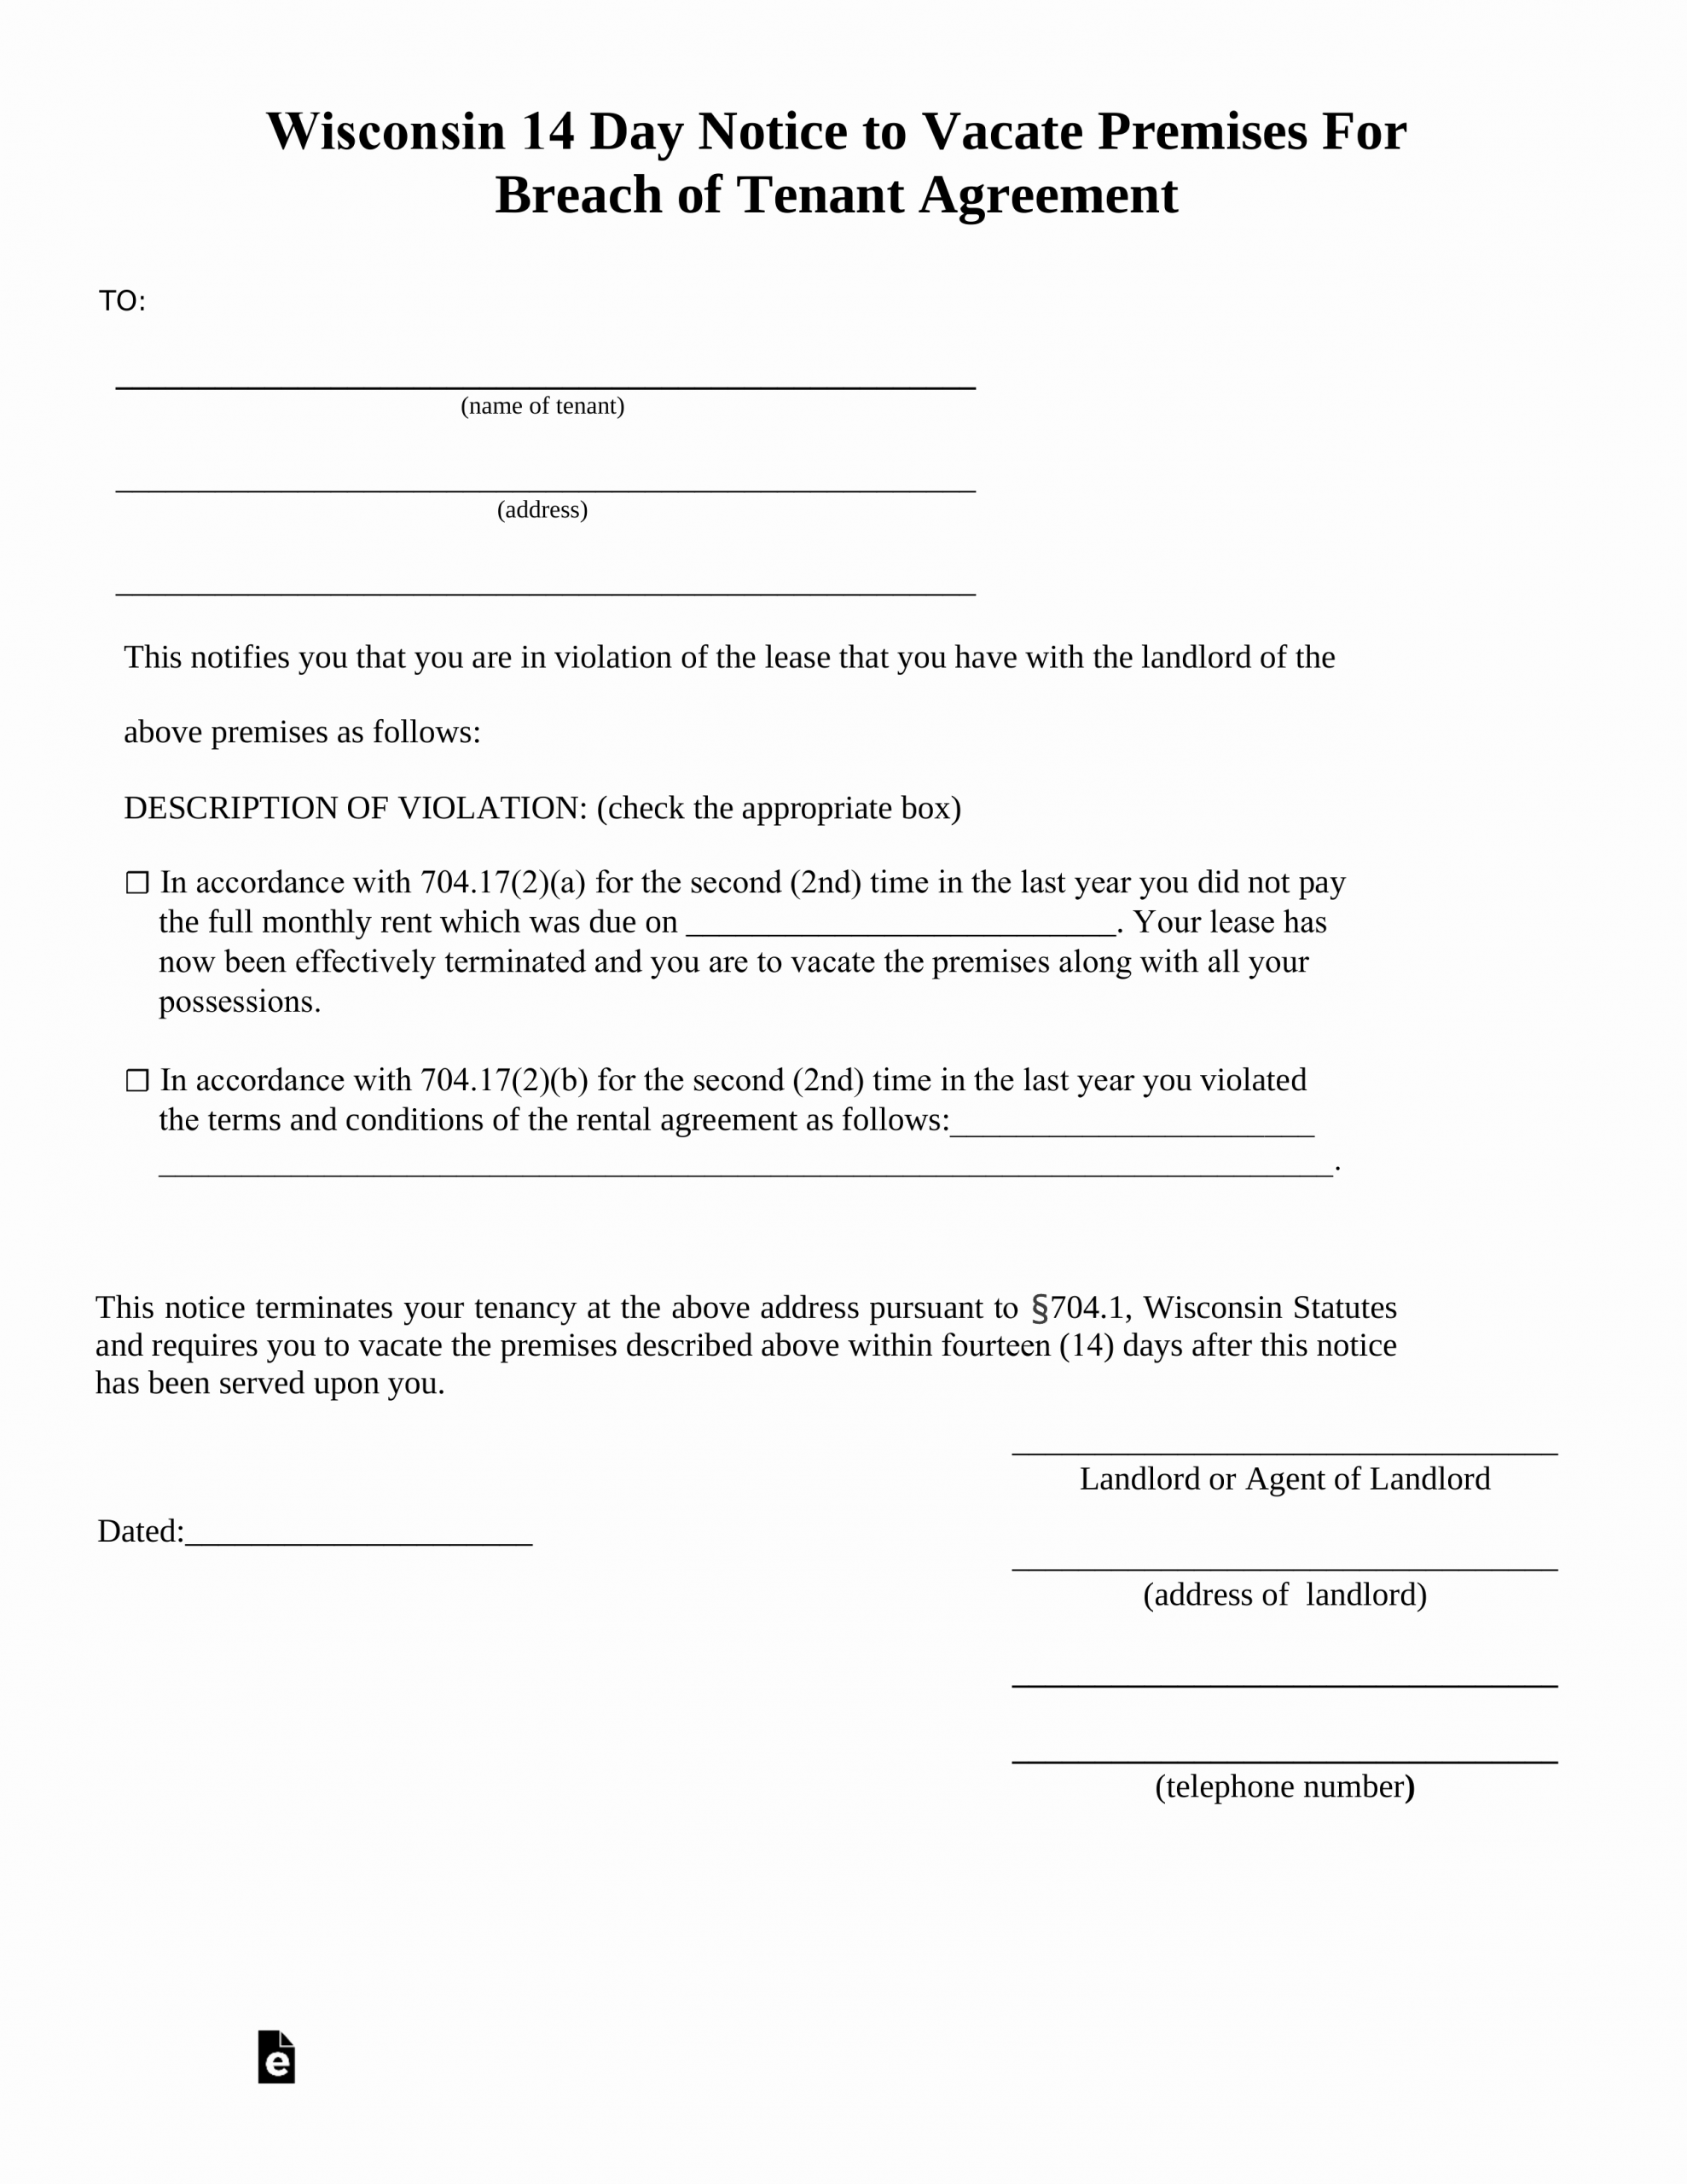 Alabama Eviction Notice Template Luxury Wisconsin 14 Day Notice to Quit form